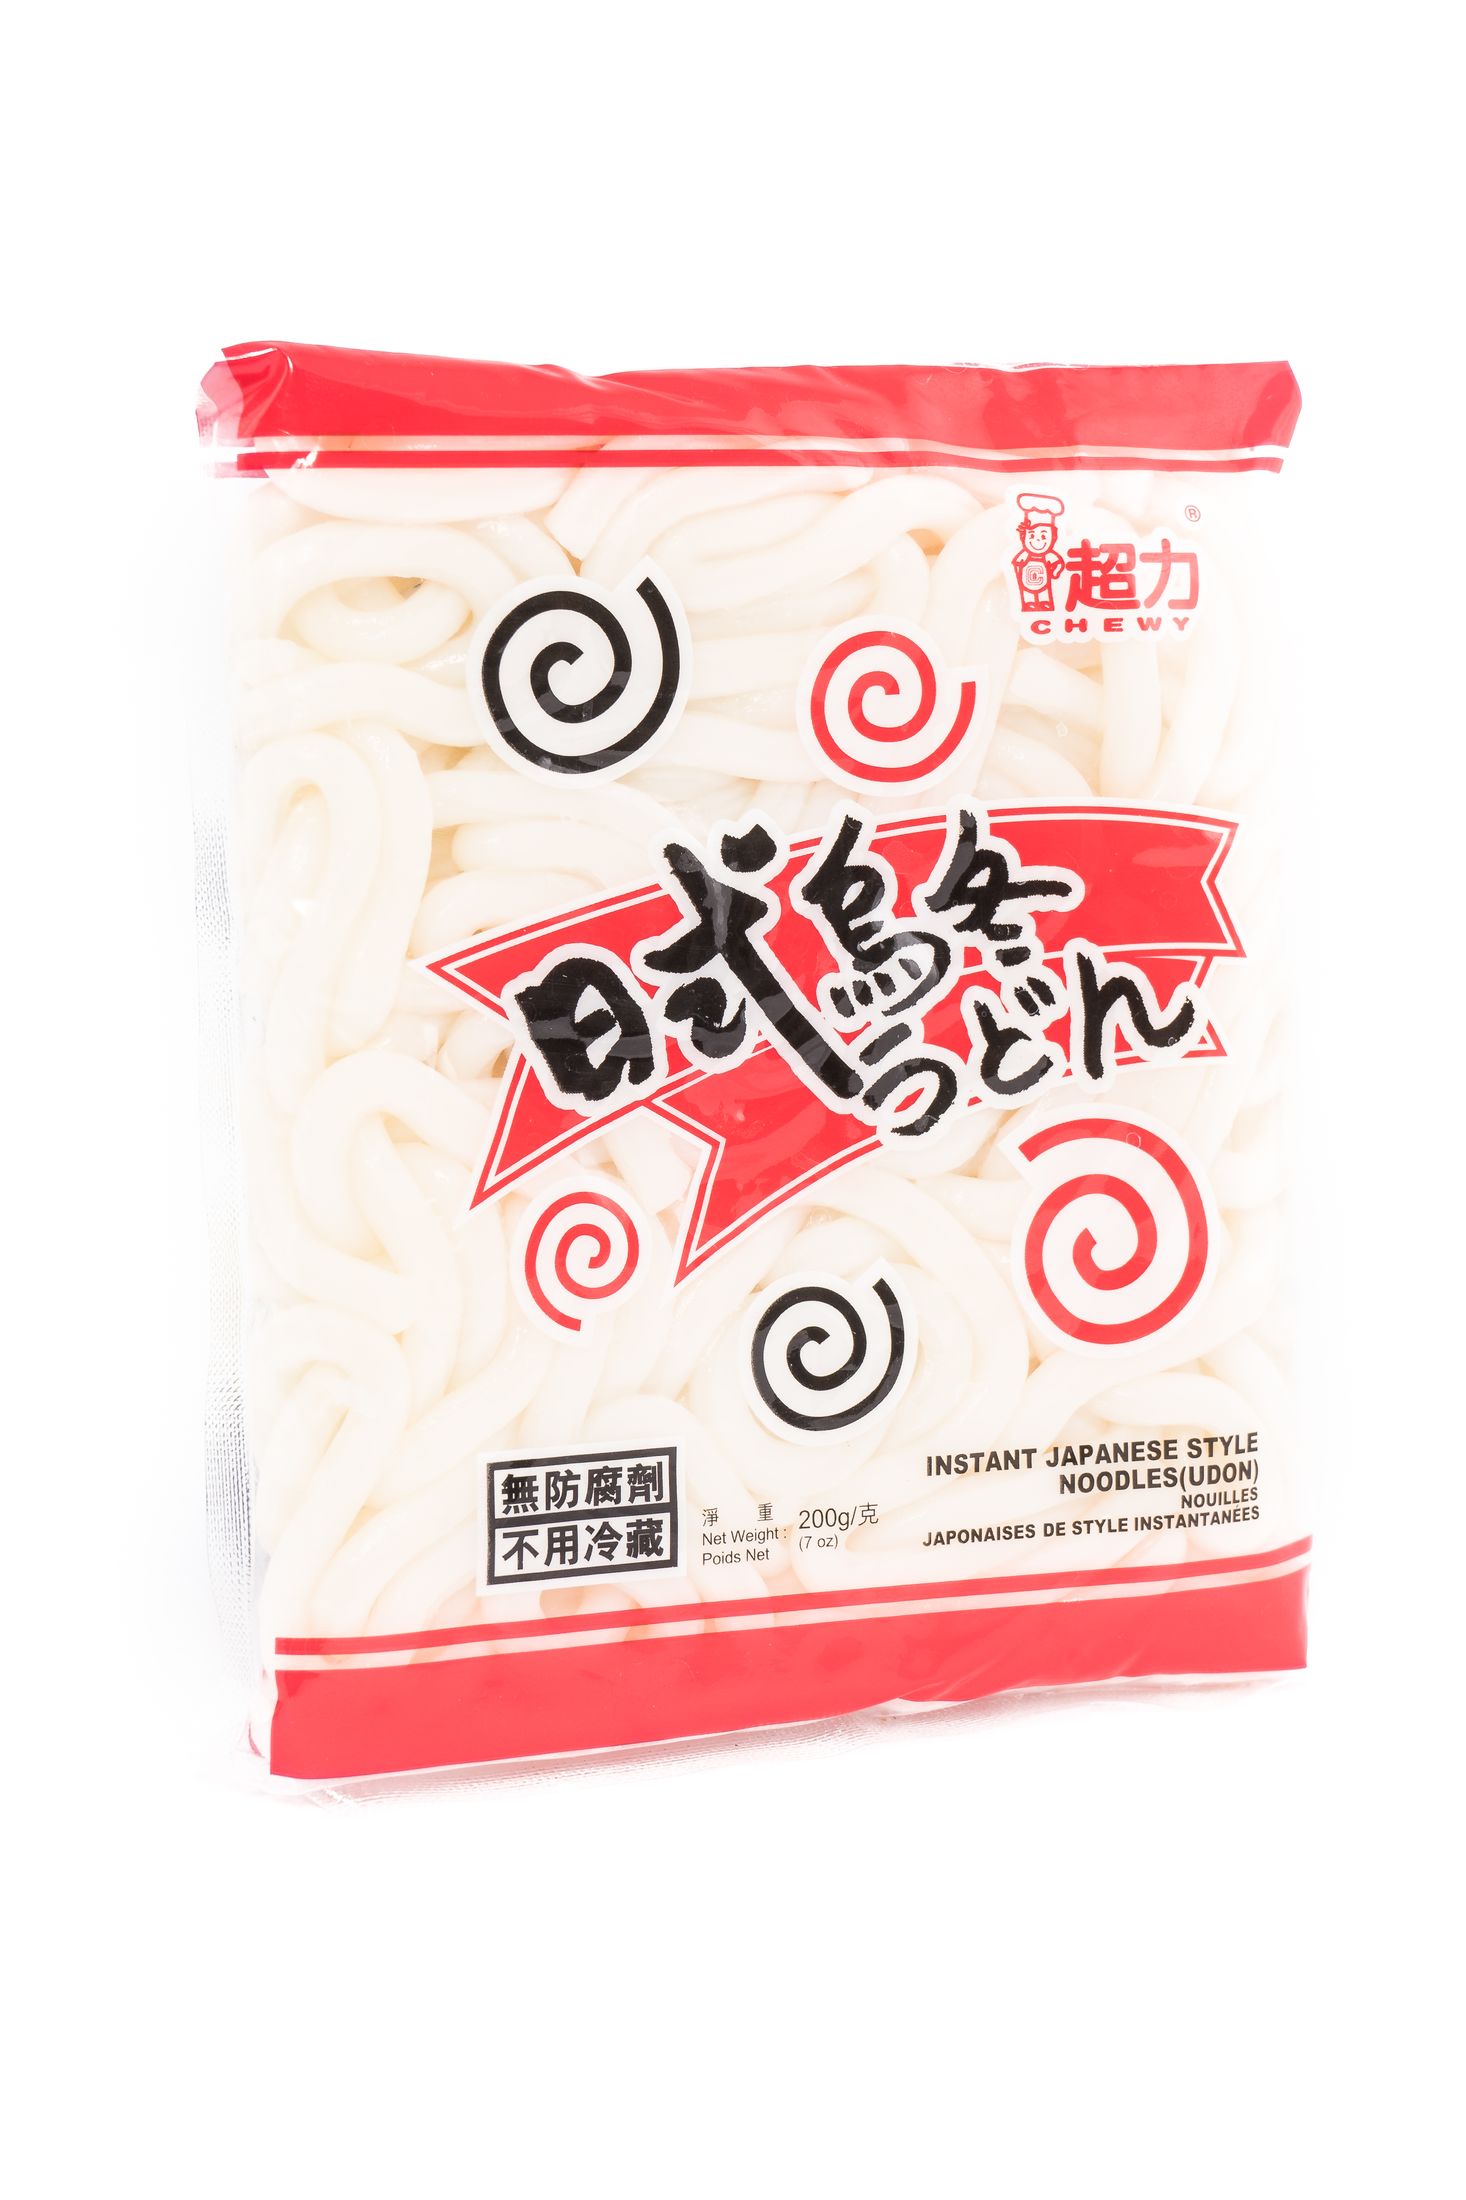 Chewy Udon noodle Japanese style